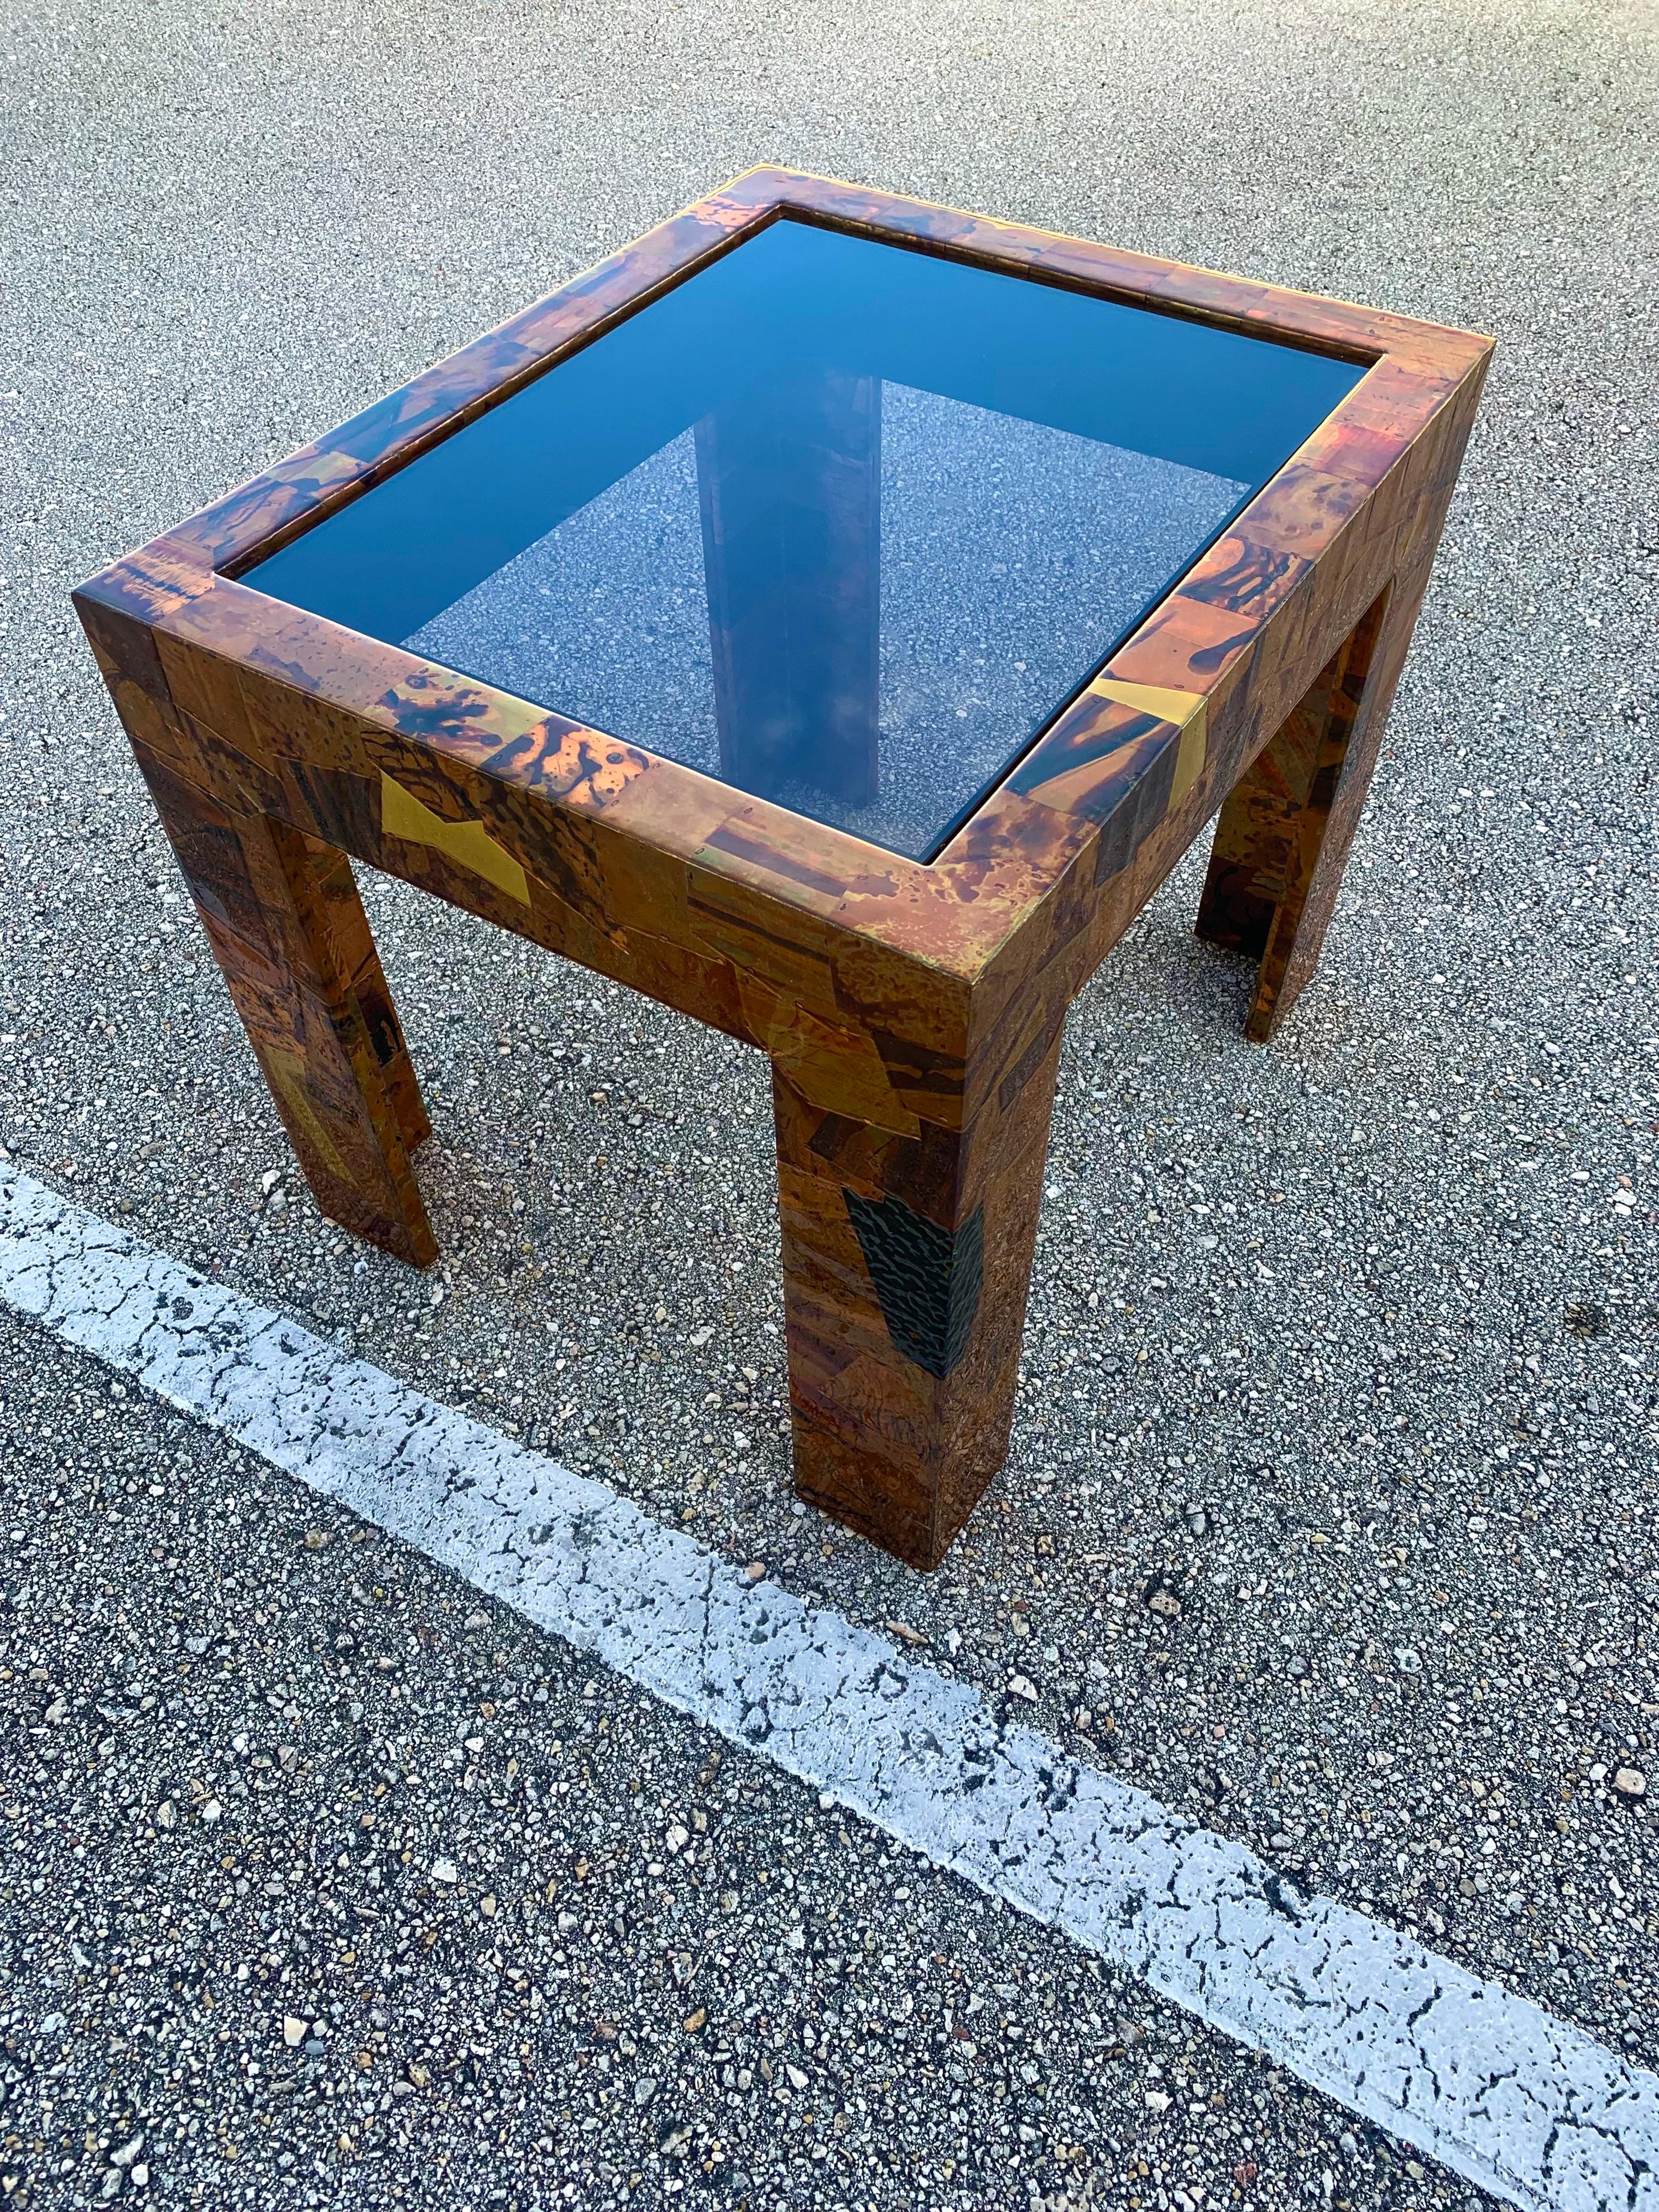 Studio made copper and brass accent table with smoked glass. Made to have a brutalist flair, the artist used different pieces of textured copper and brass to cover the entire table. The plates are affixed with copper staples then coated in a thick